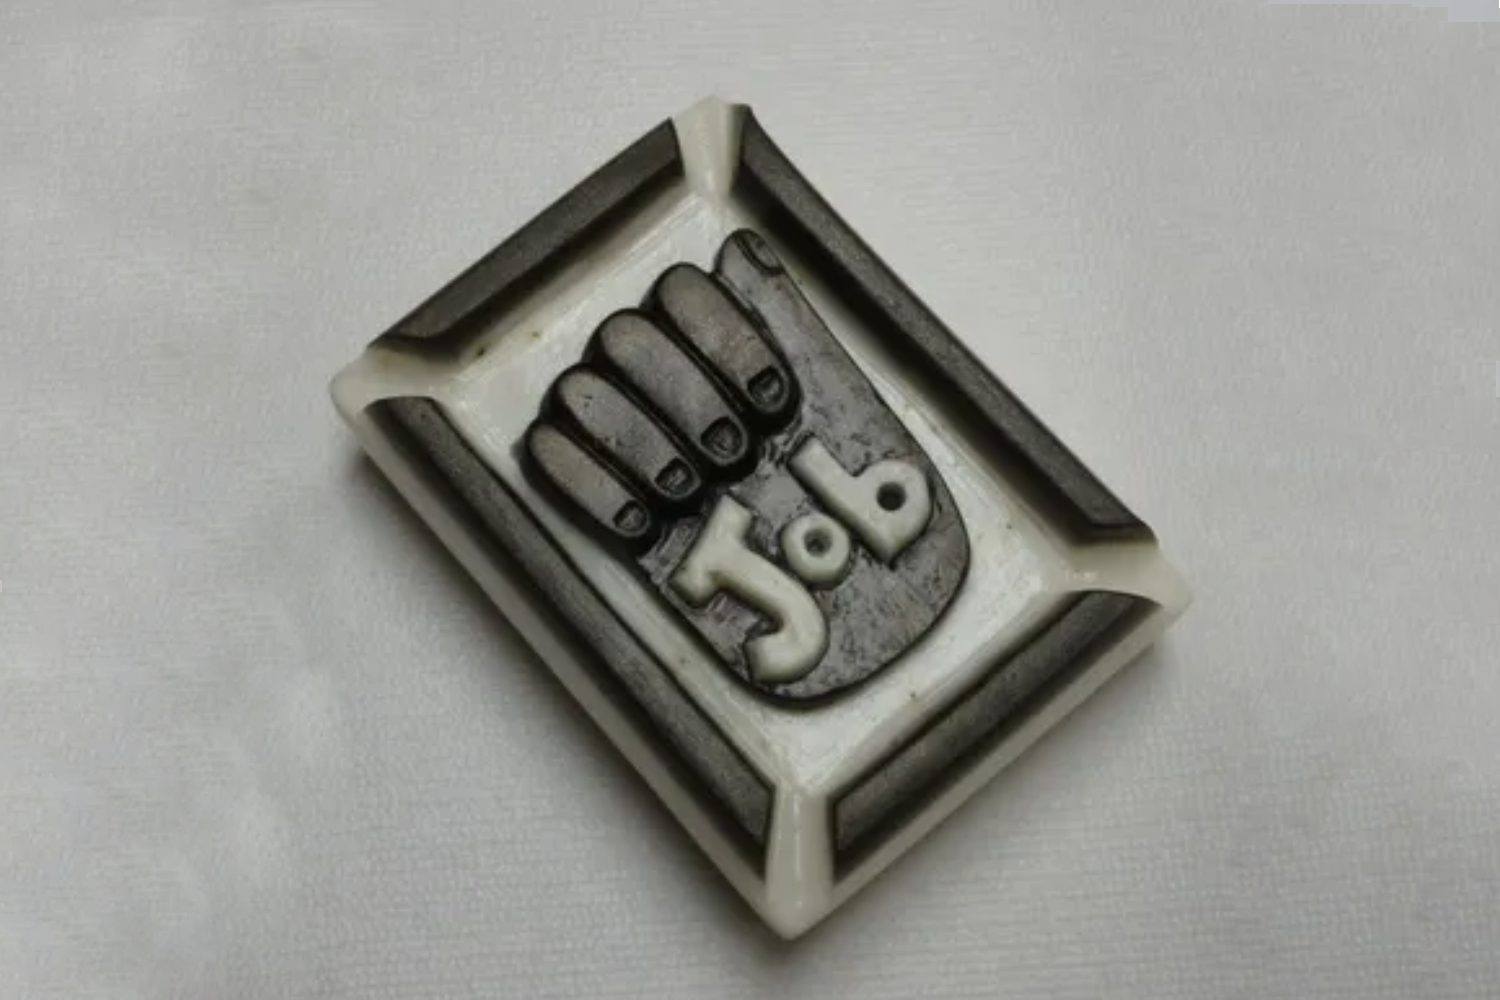 A rubber stamp with the word job written in it.